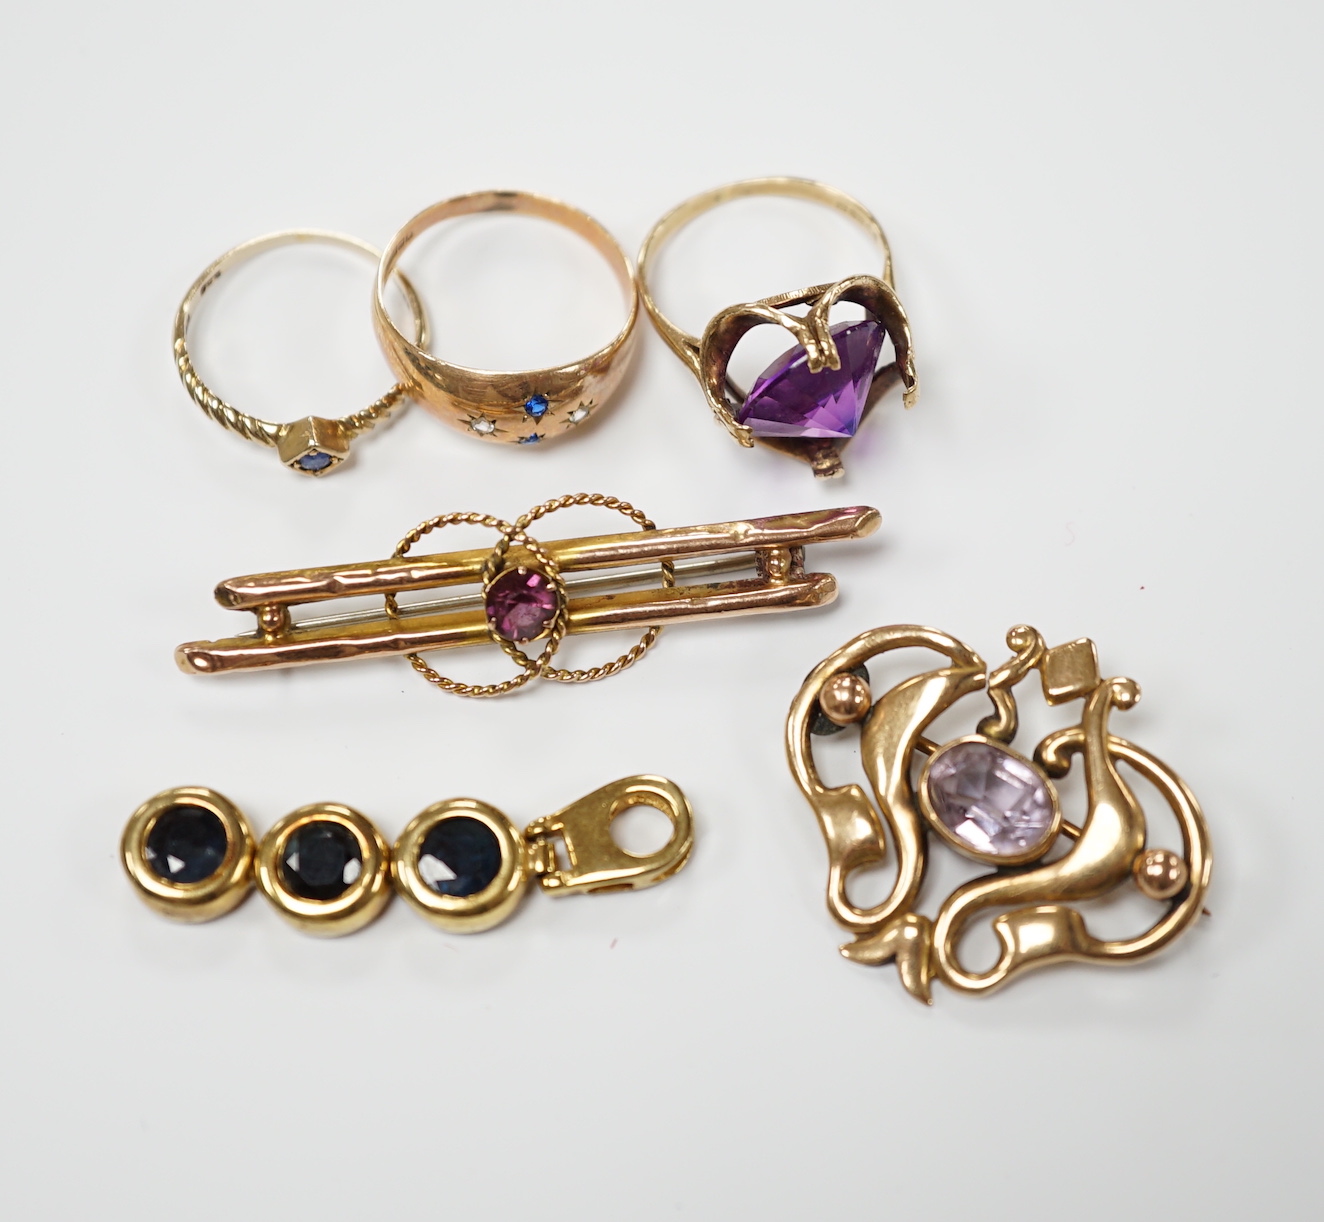 Six items of assorted jewellery including three 9ct and gem set rings, an Edwardian 9ct and amethyst set brooch, a 9ct and gem set bar brooch and a 9ct and gem set drop pendant, gross weight 15.5 grams.